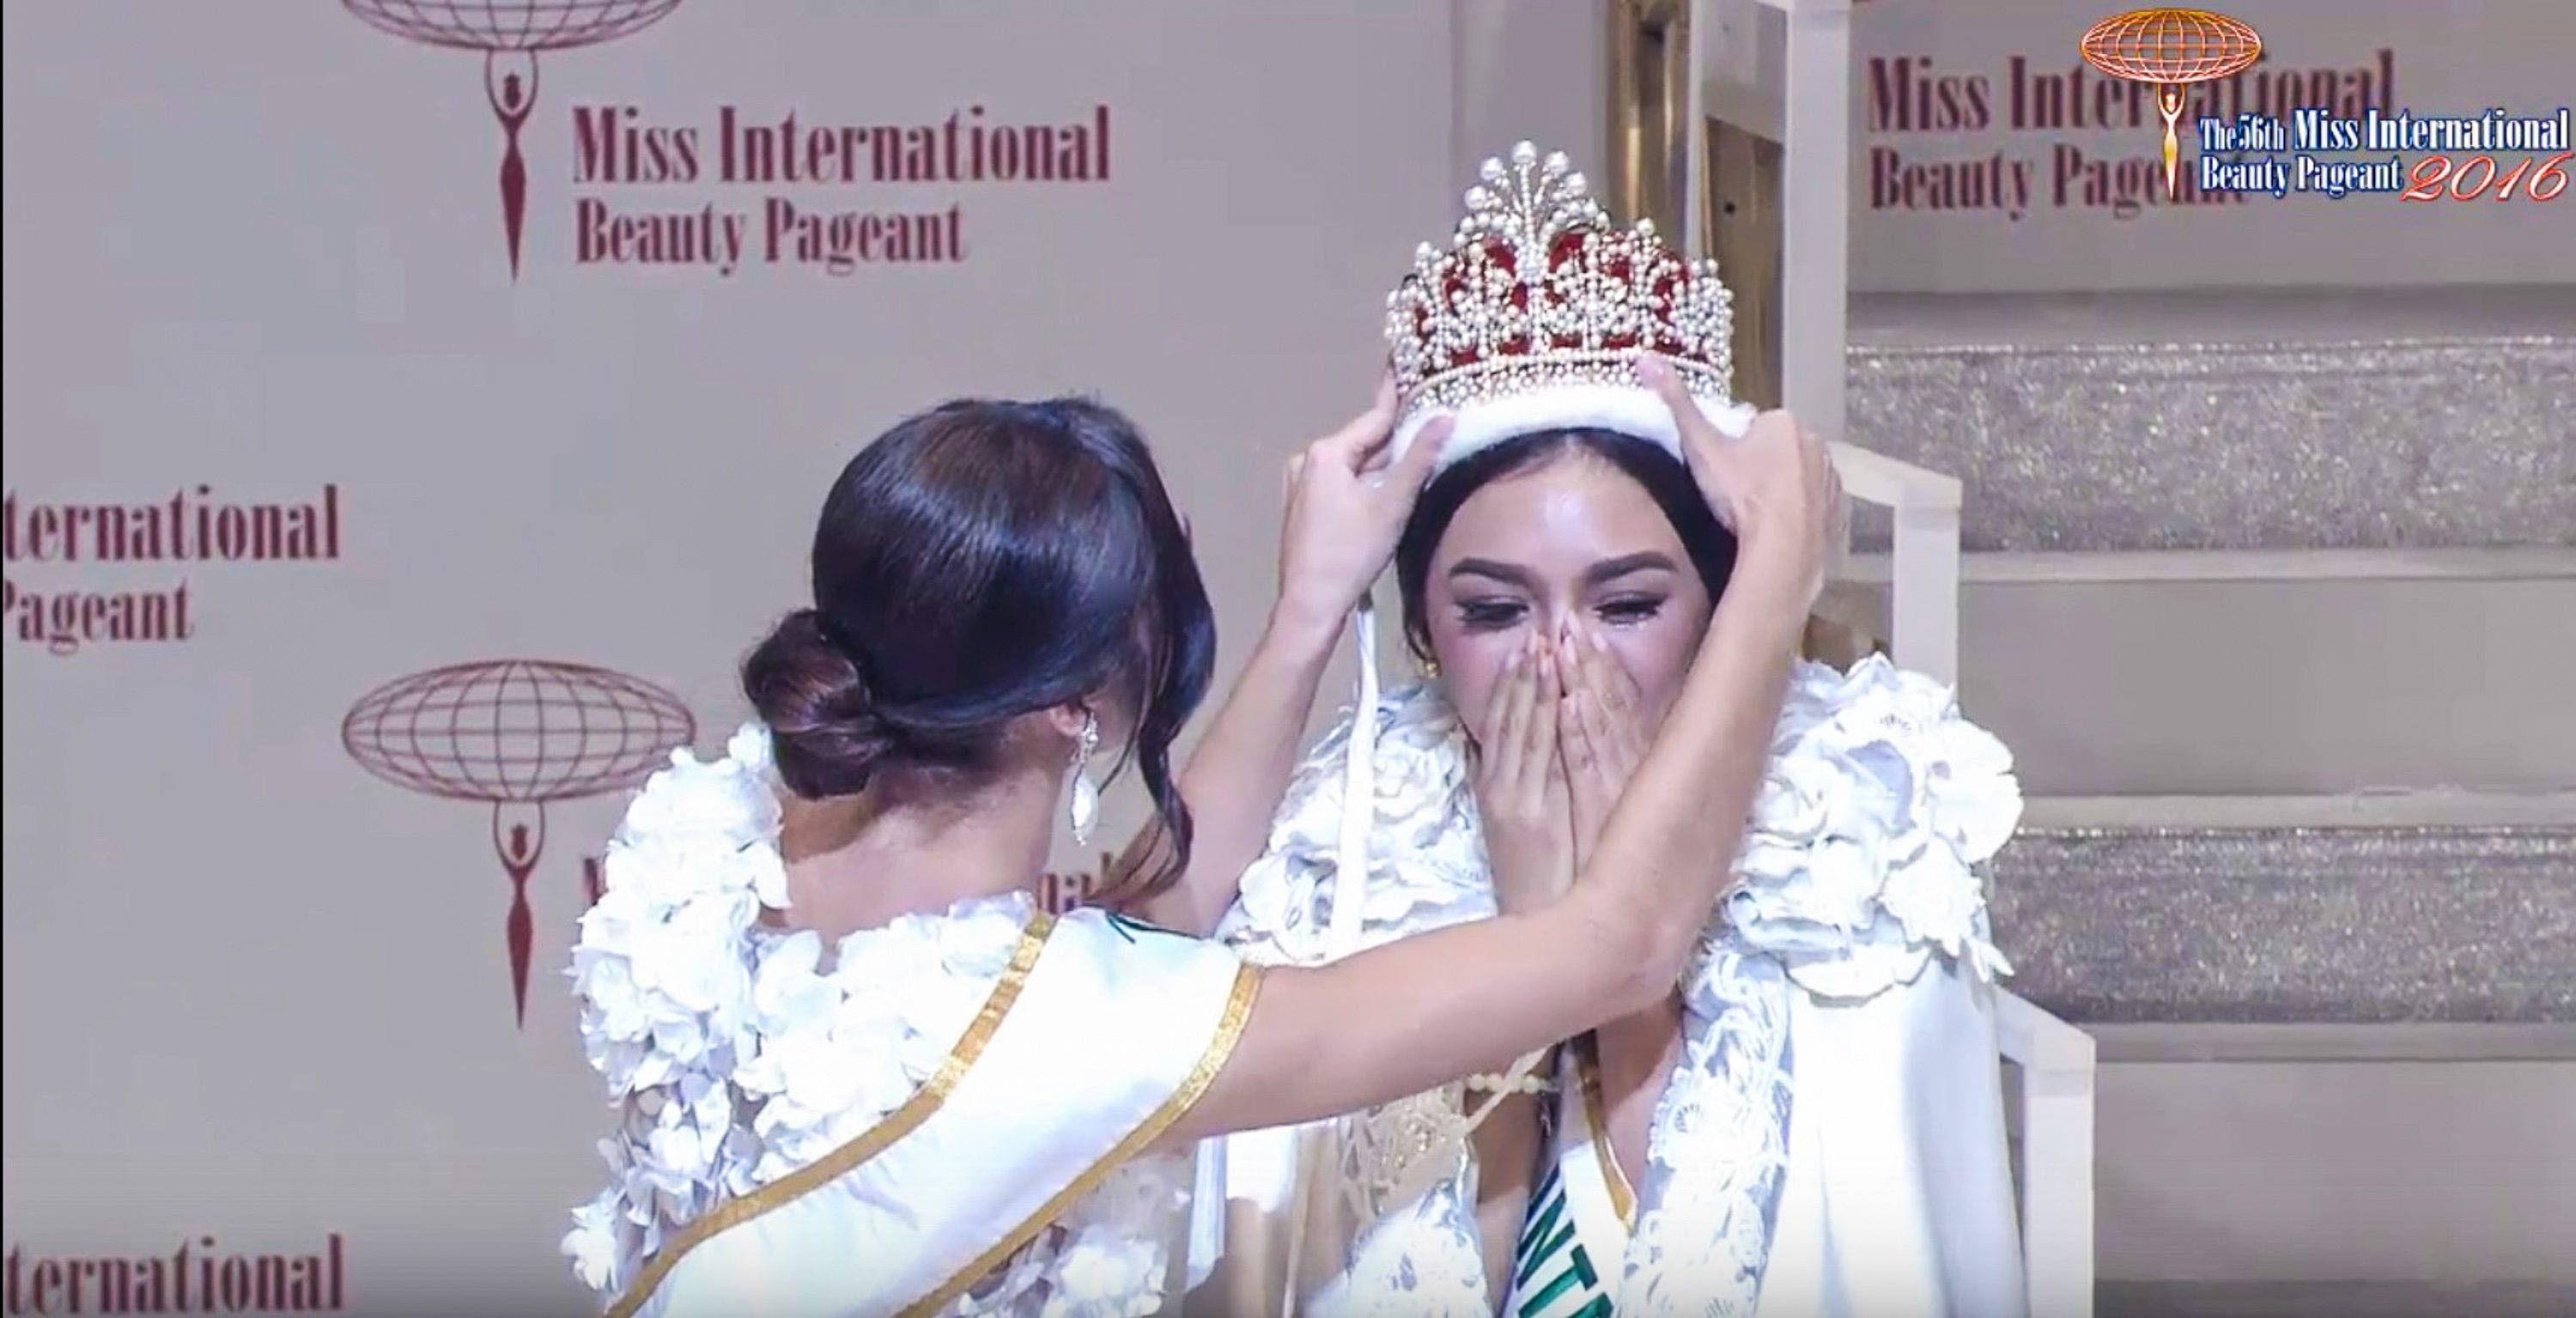 Screengrab from YouTube/MISS INTERNATIONAL BEAUTY PAGEANT 